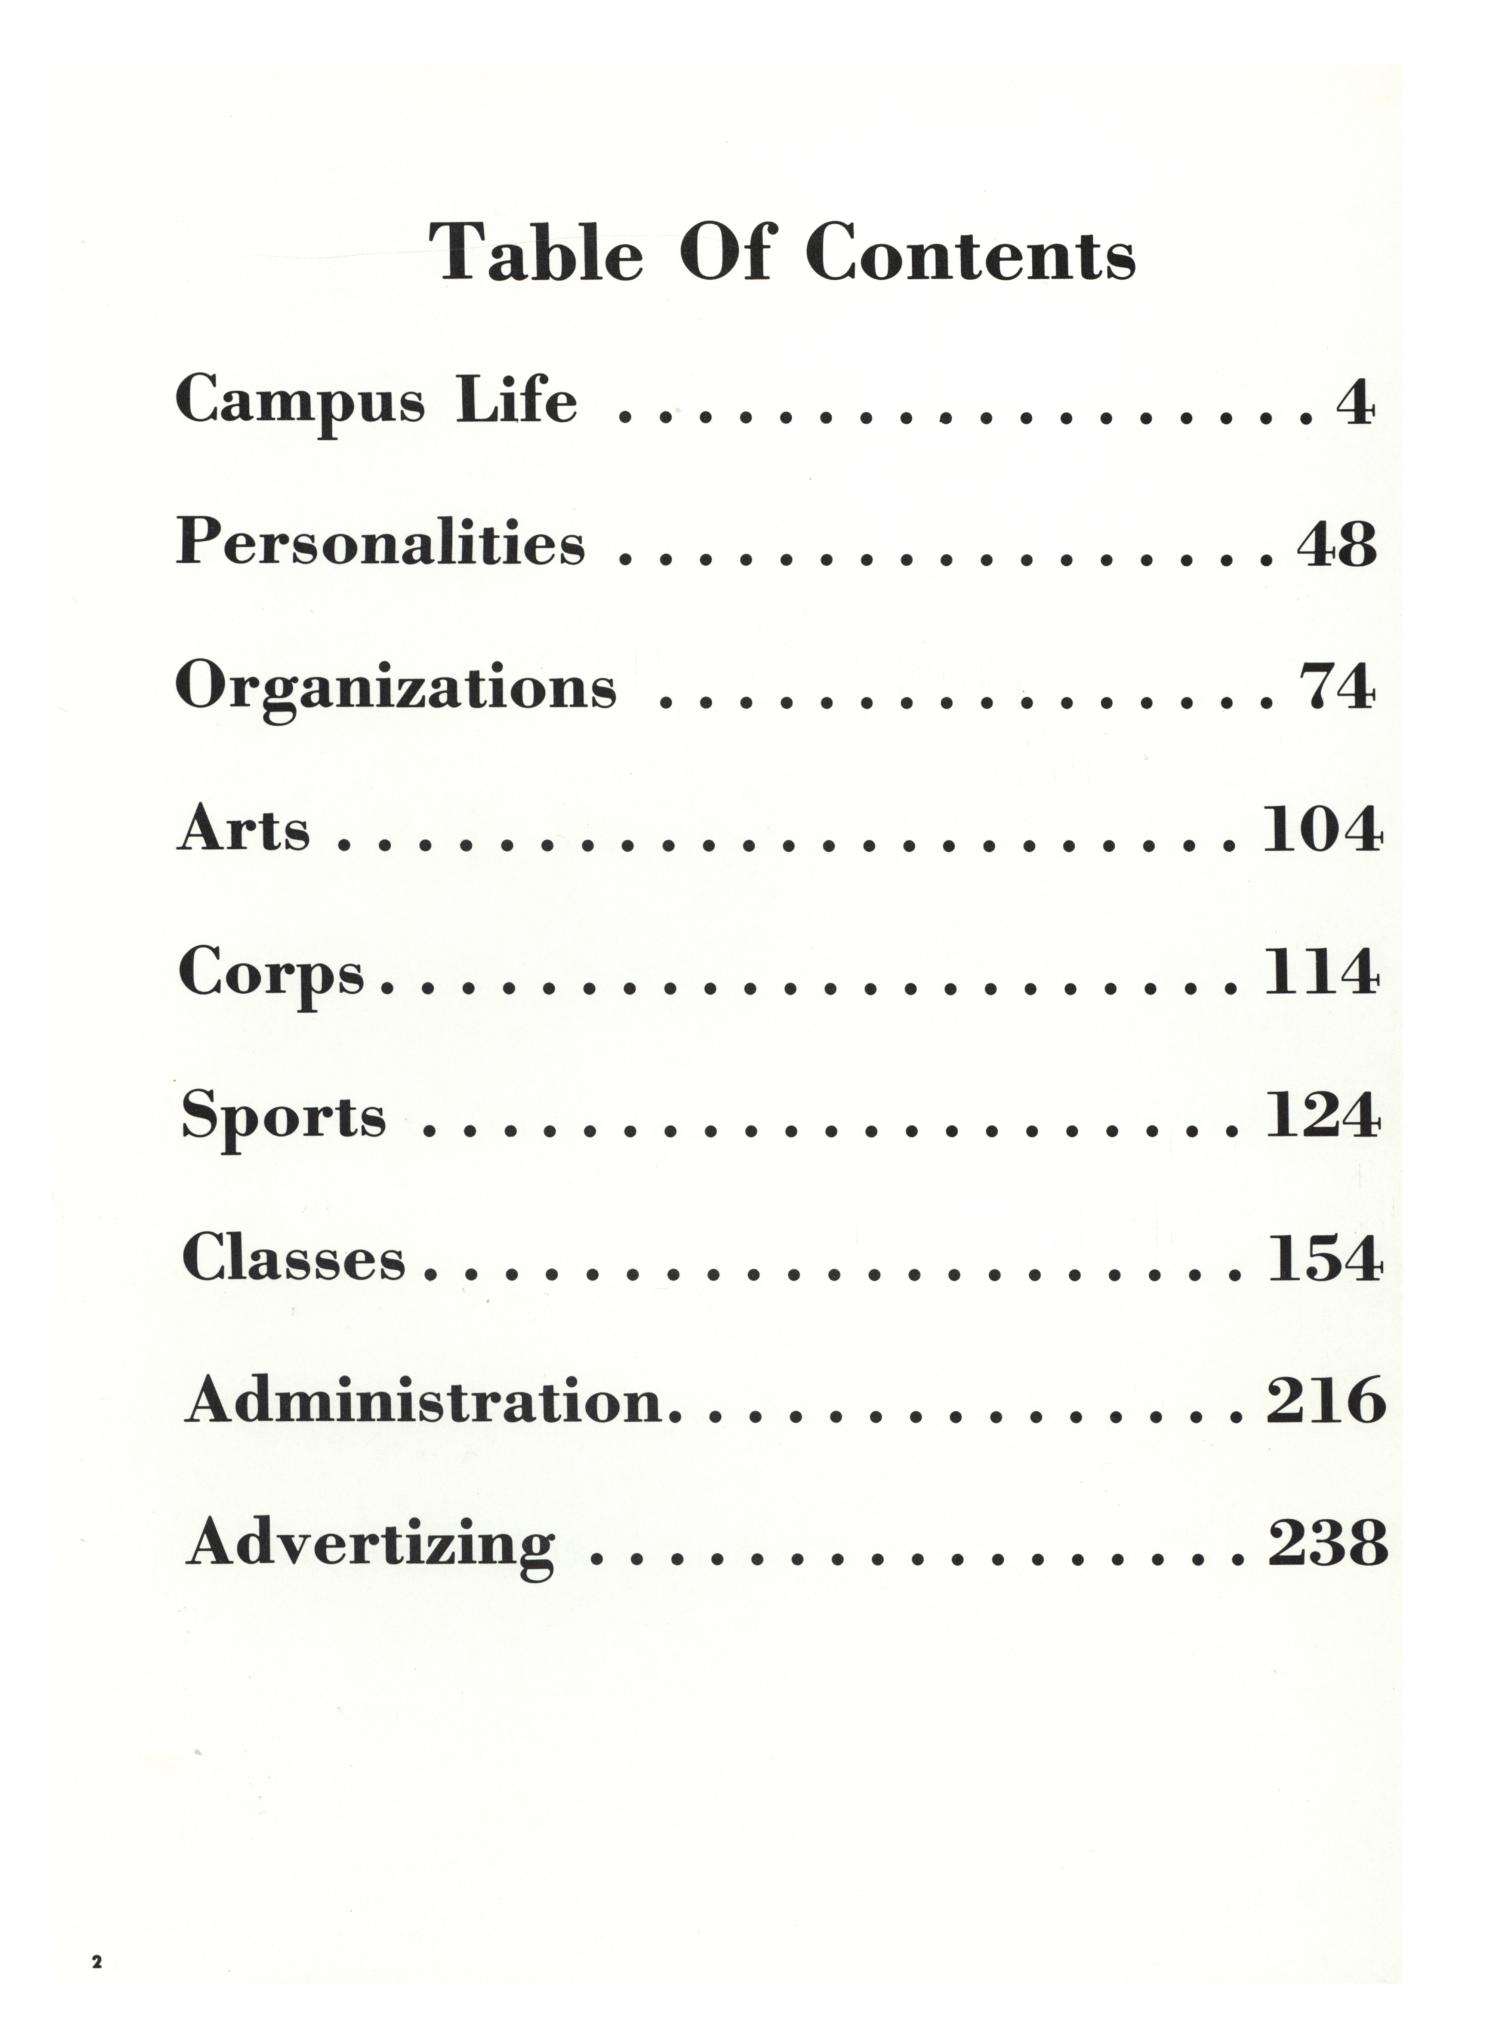 The Grassburr, Yearbook of Tarleton State College, 1971
                                                
                                                    2
                                                